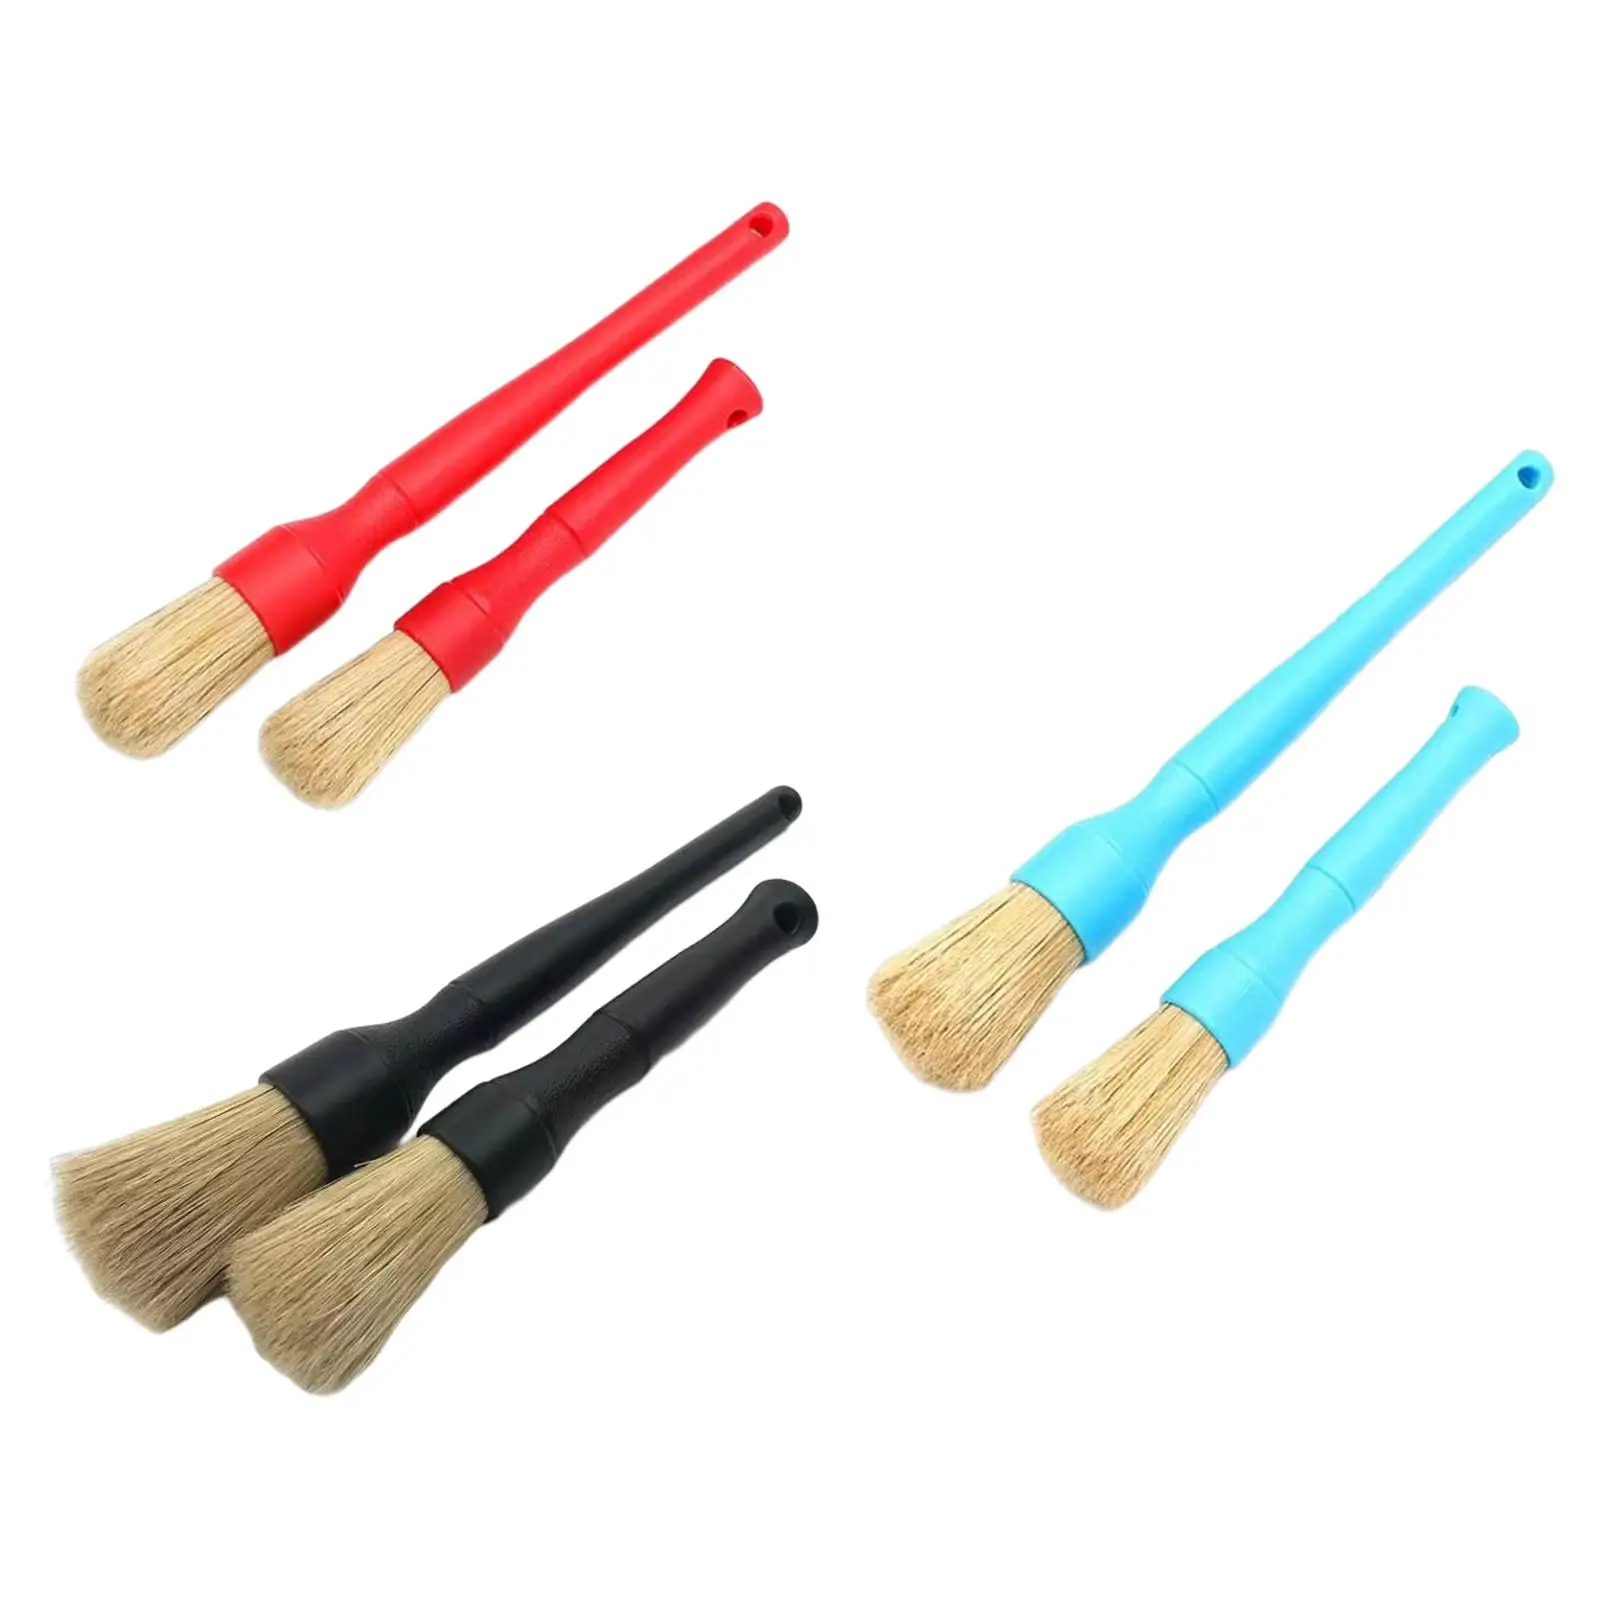 2x Car Automobile Detailing Brush with Hole Handy Tool for #Automotive